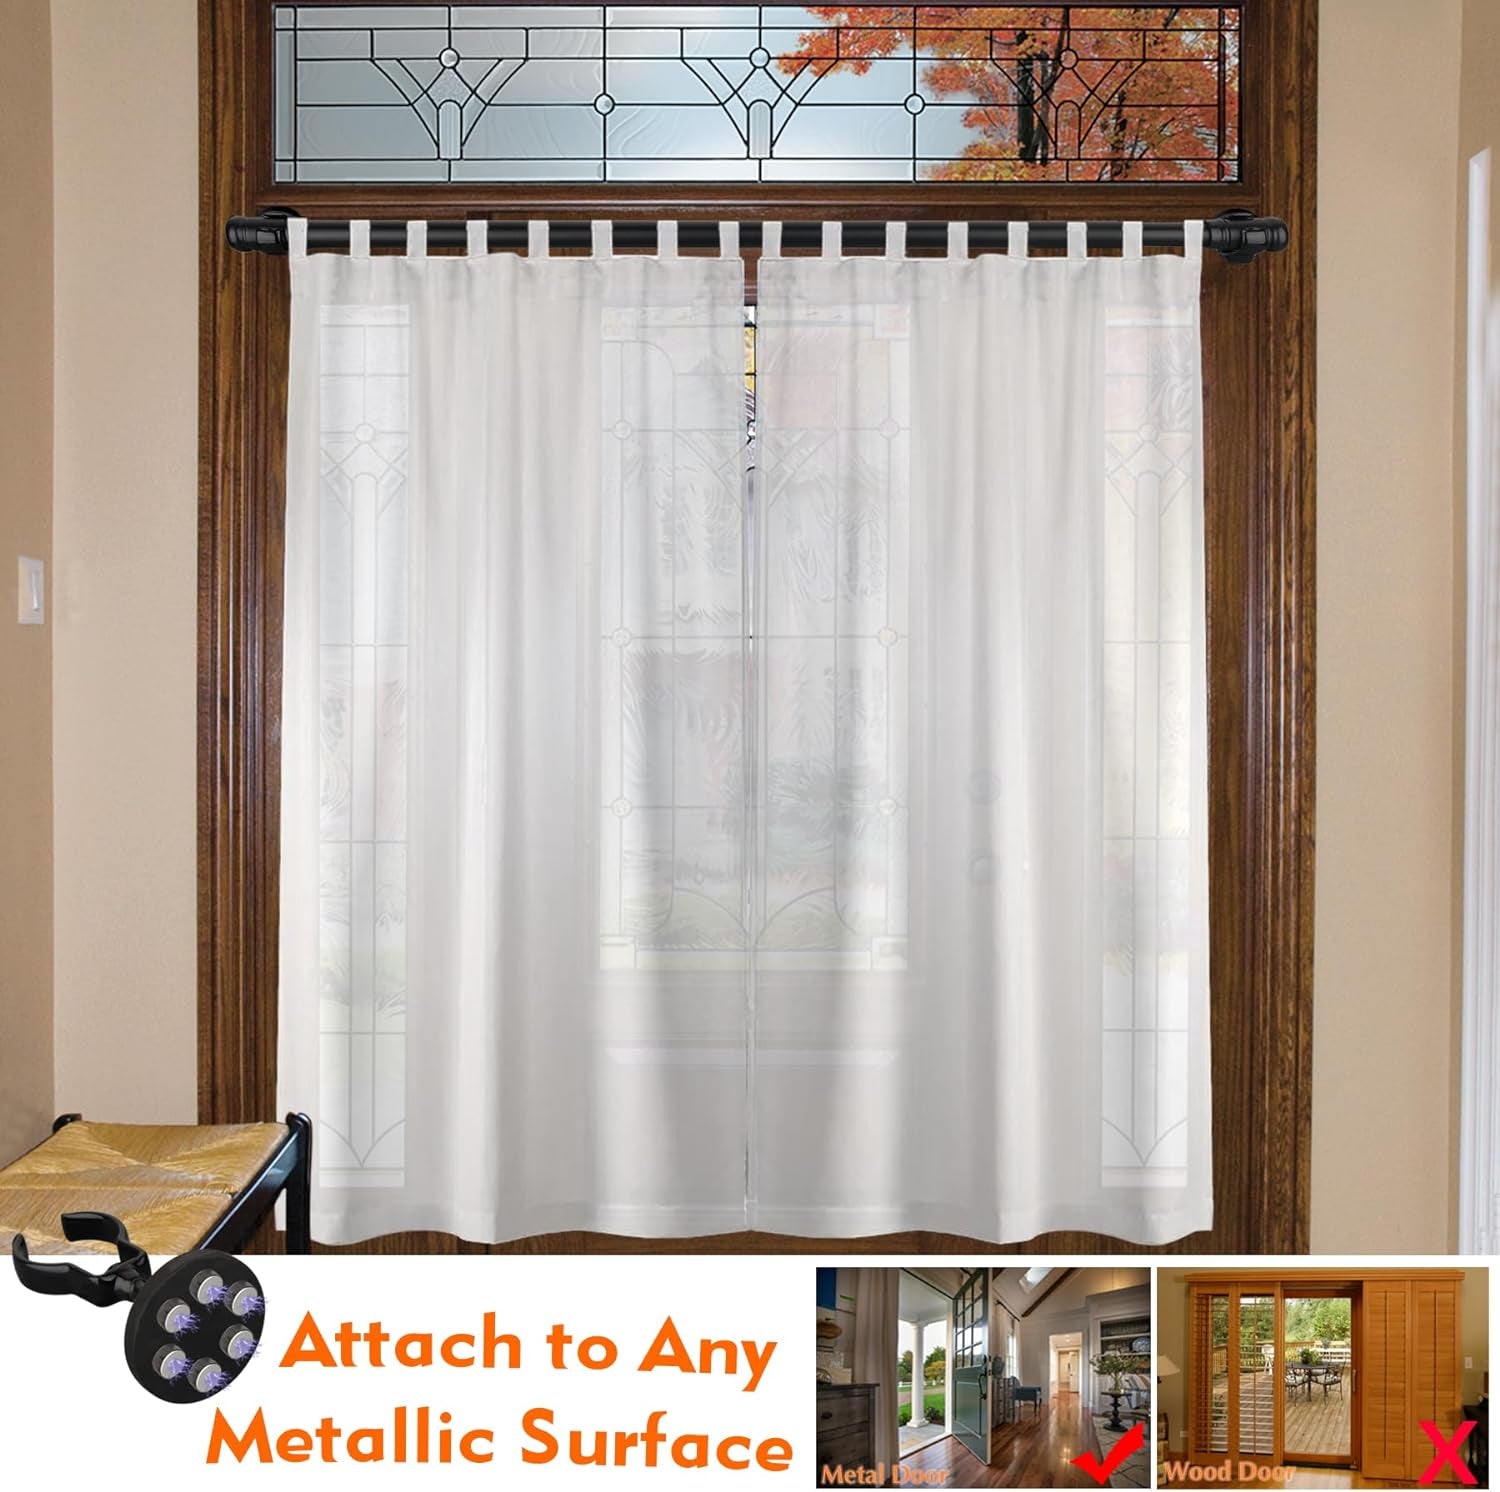 MUTUACTOR Non-Slip Magnetic Door Curtain Rods for Metal Doors 13” to 26”,2PCS Storage Magnetic Hooks Heavy Duty